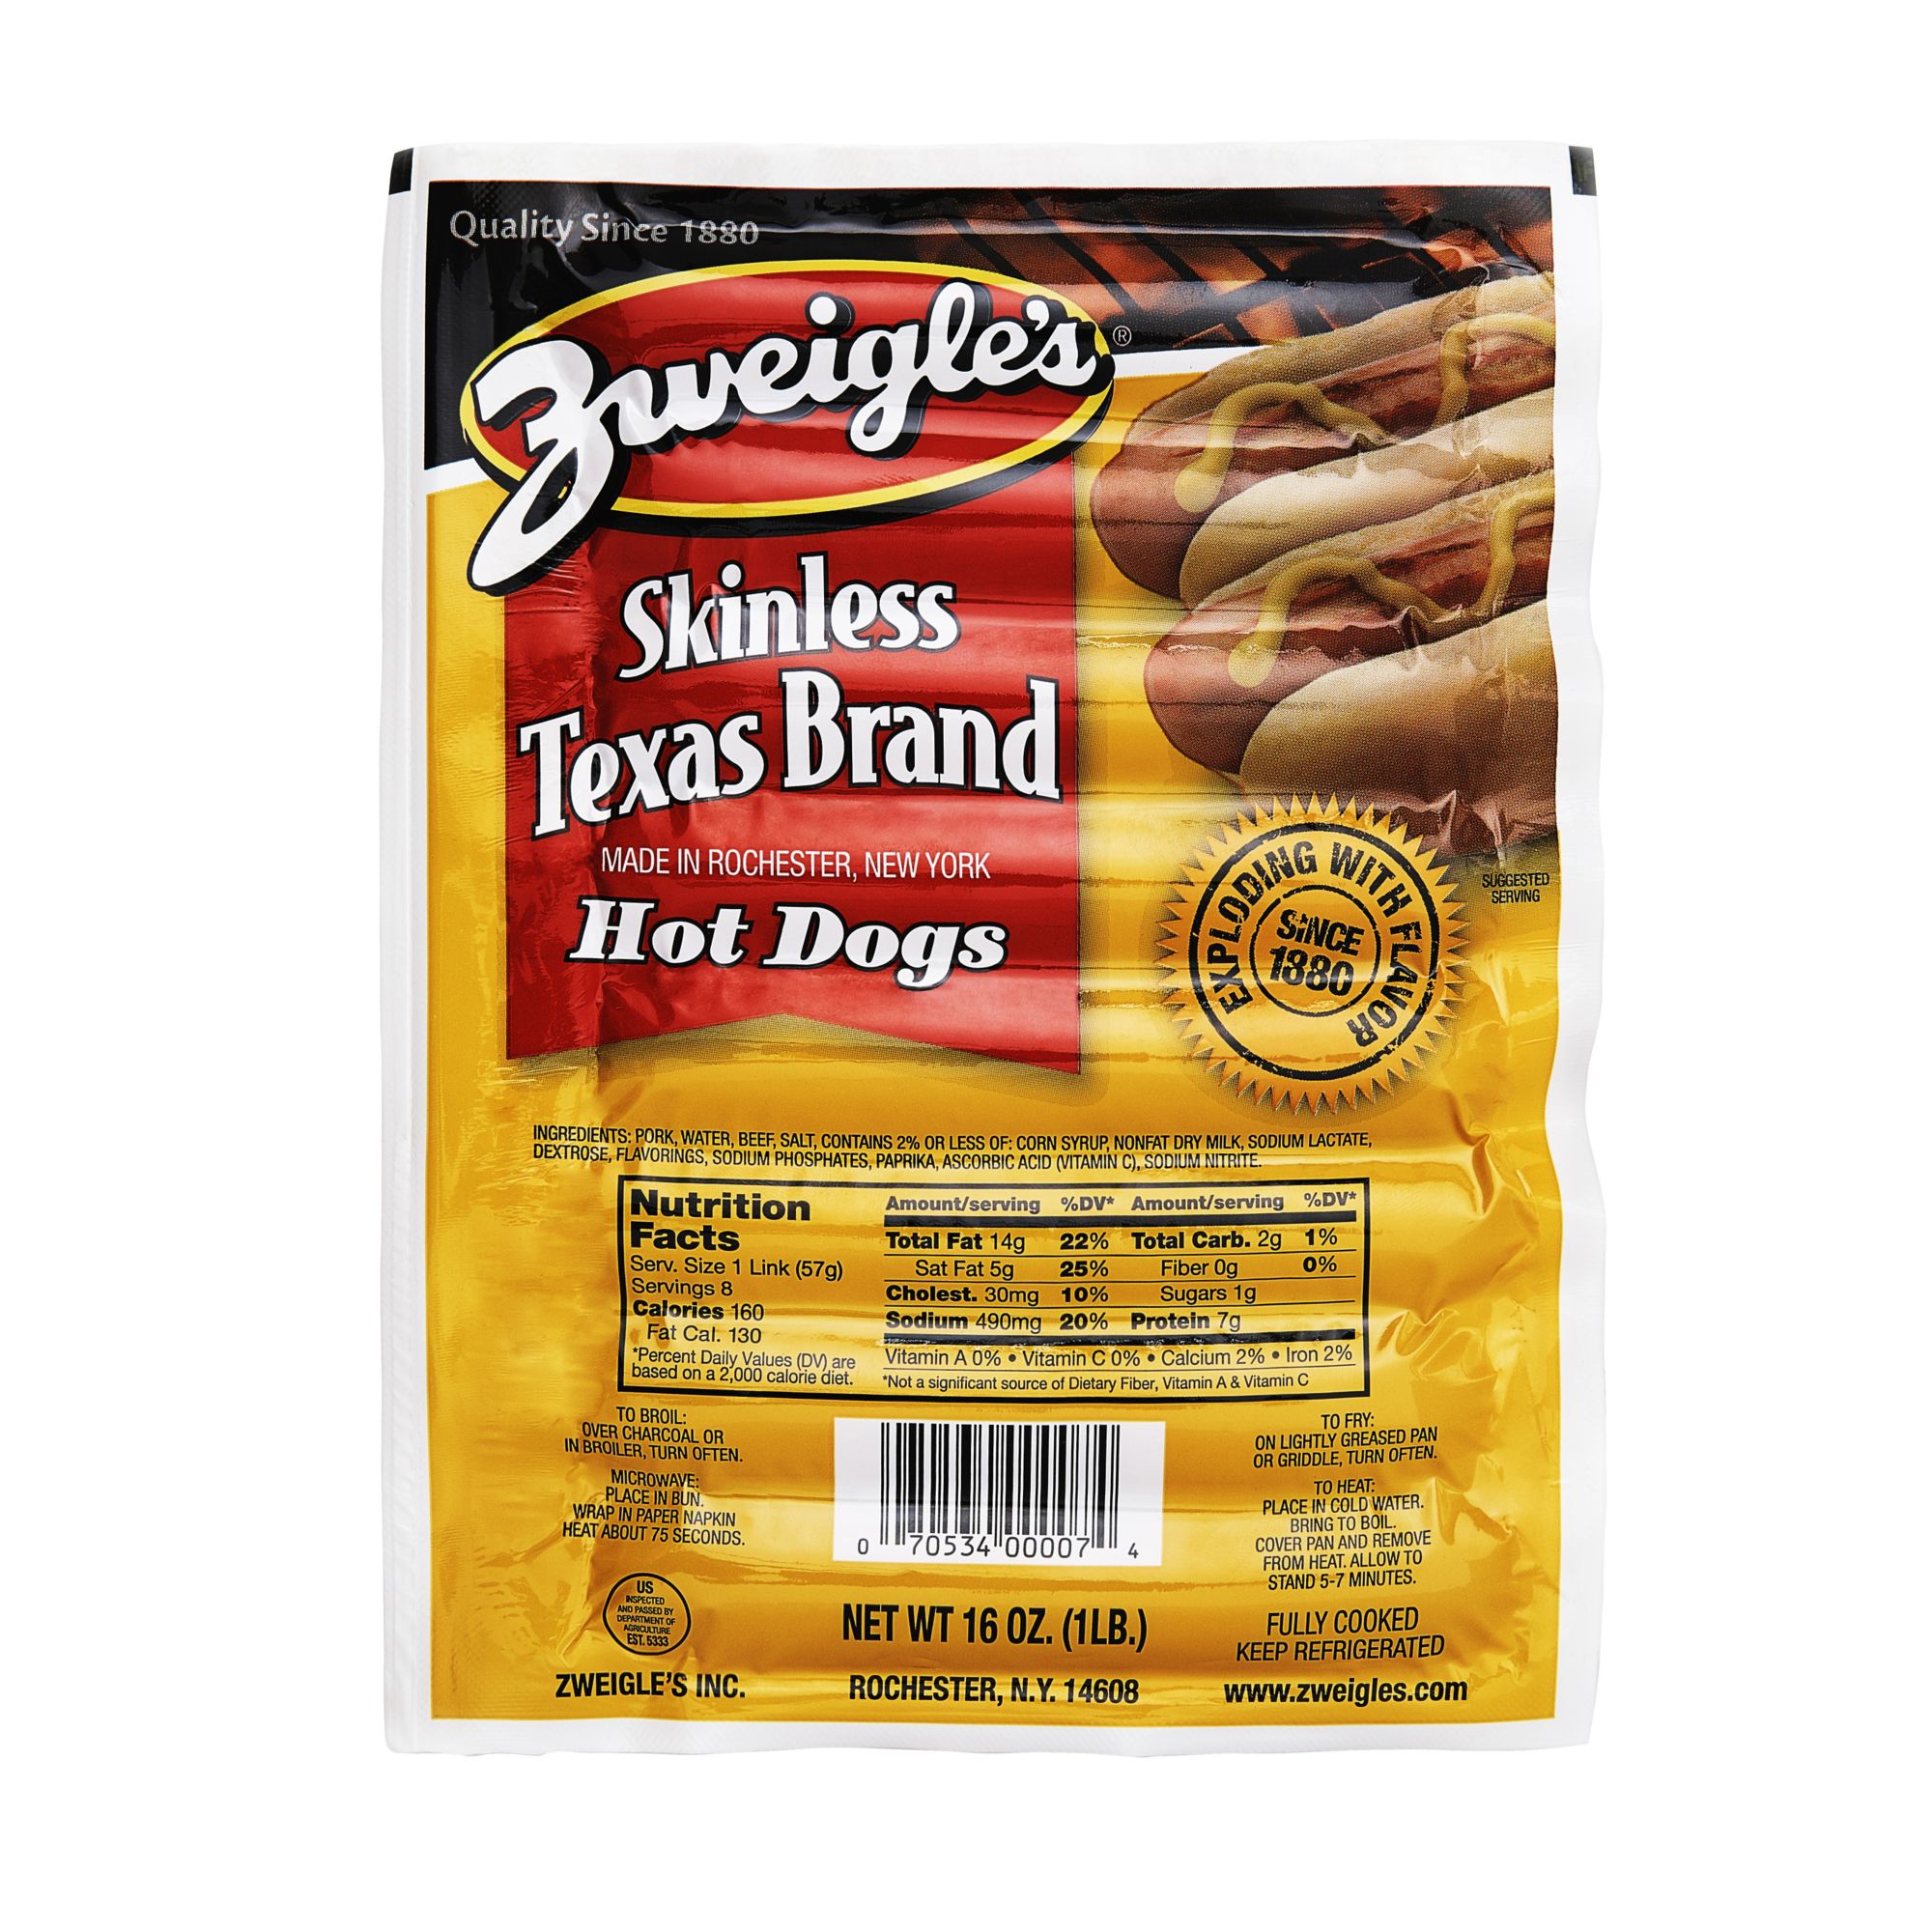 Skinless Franks 5 to 1 (10 lbs) - Dearborn Brand